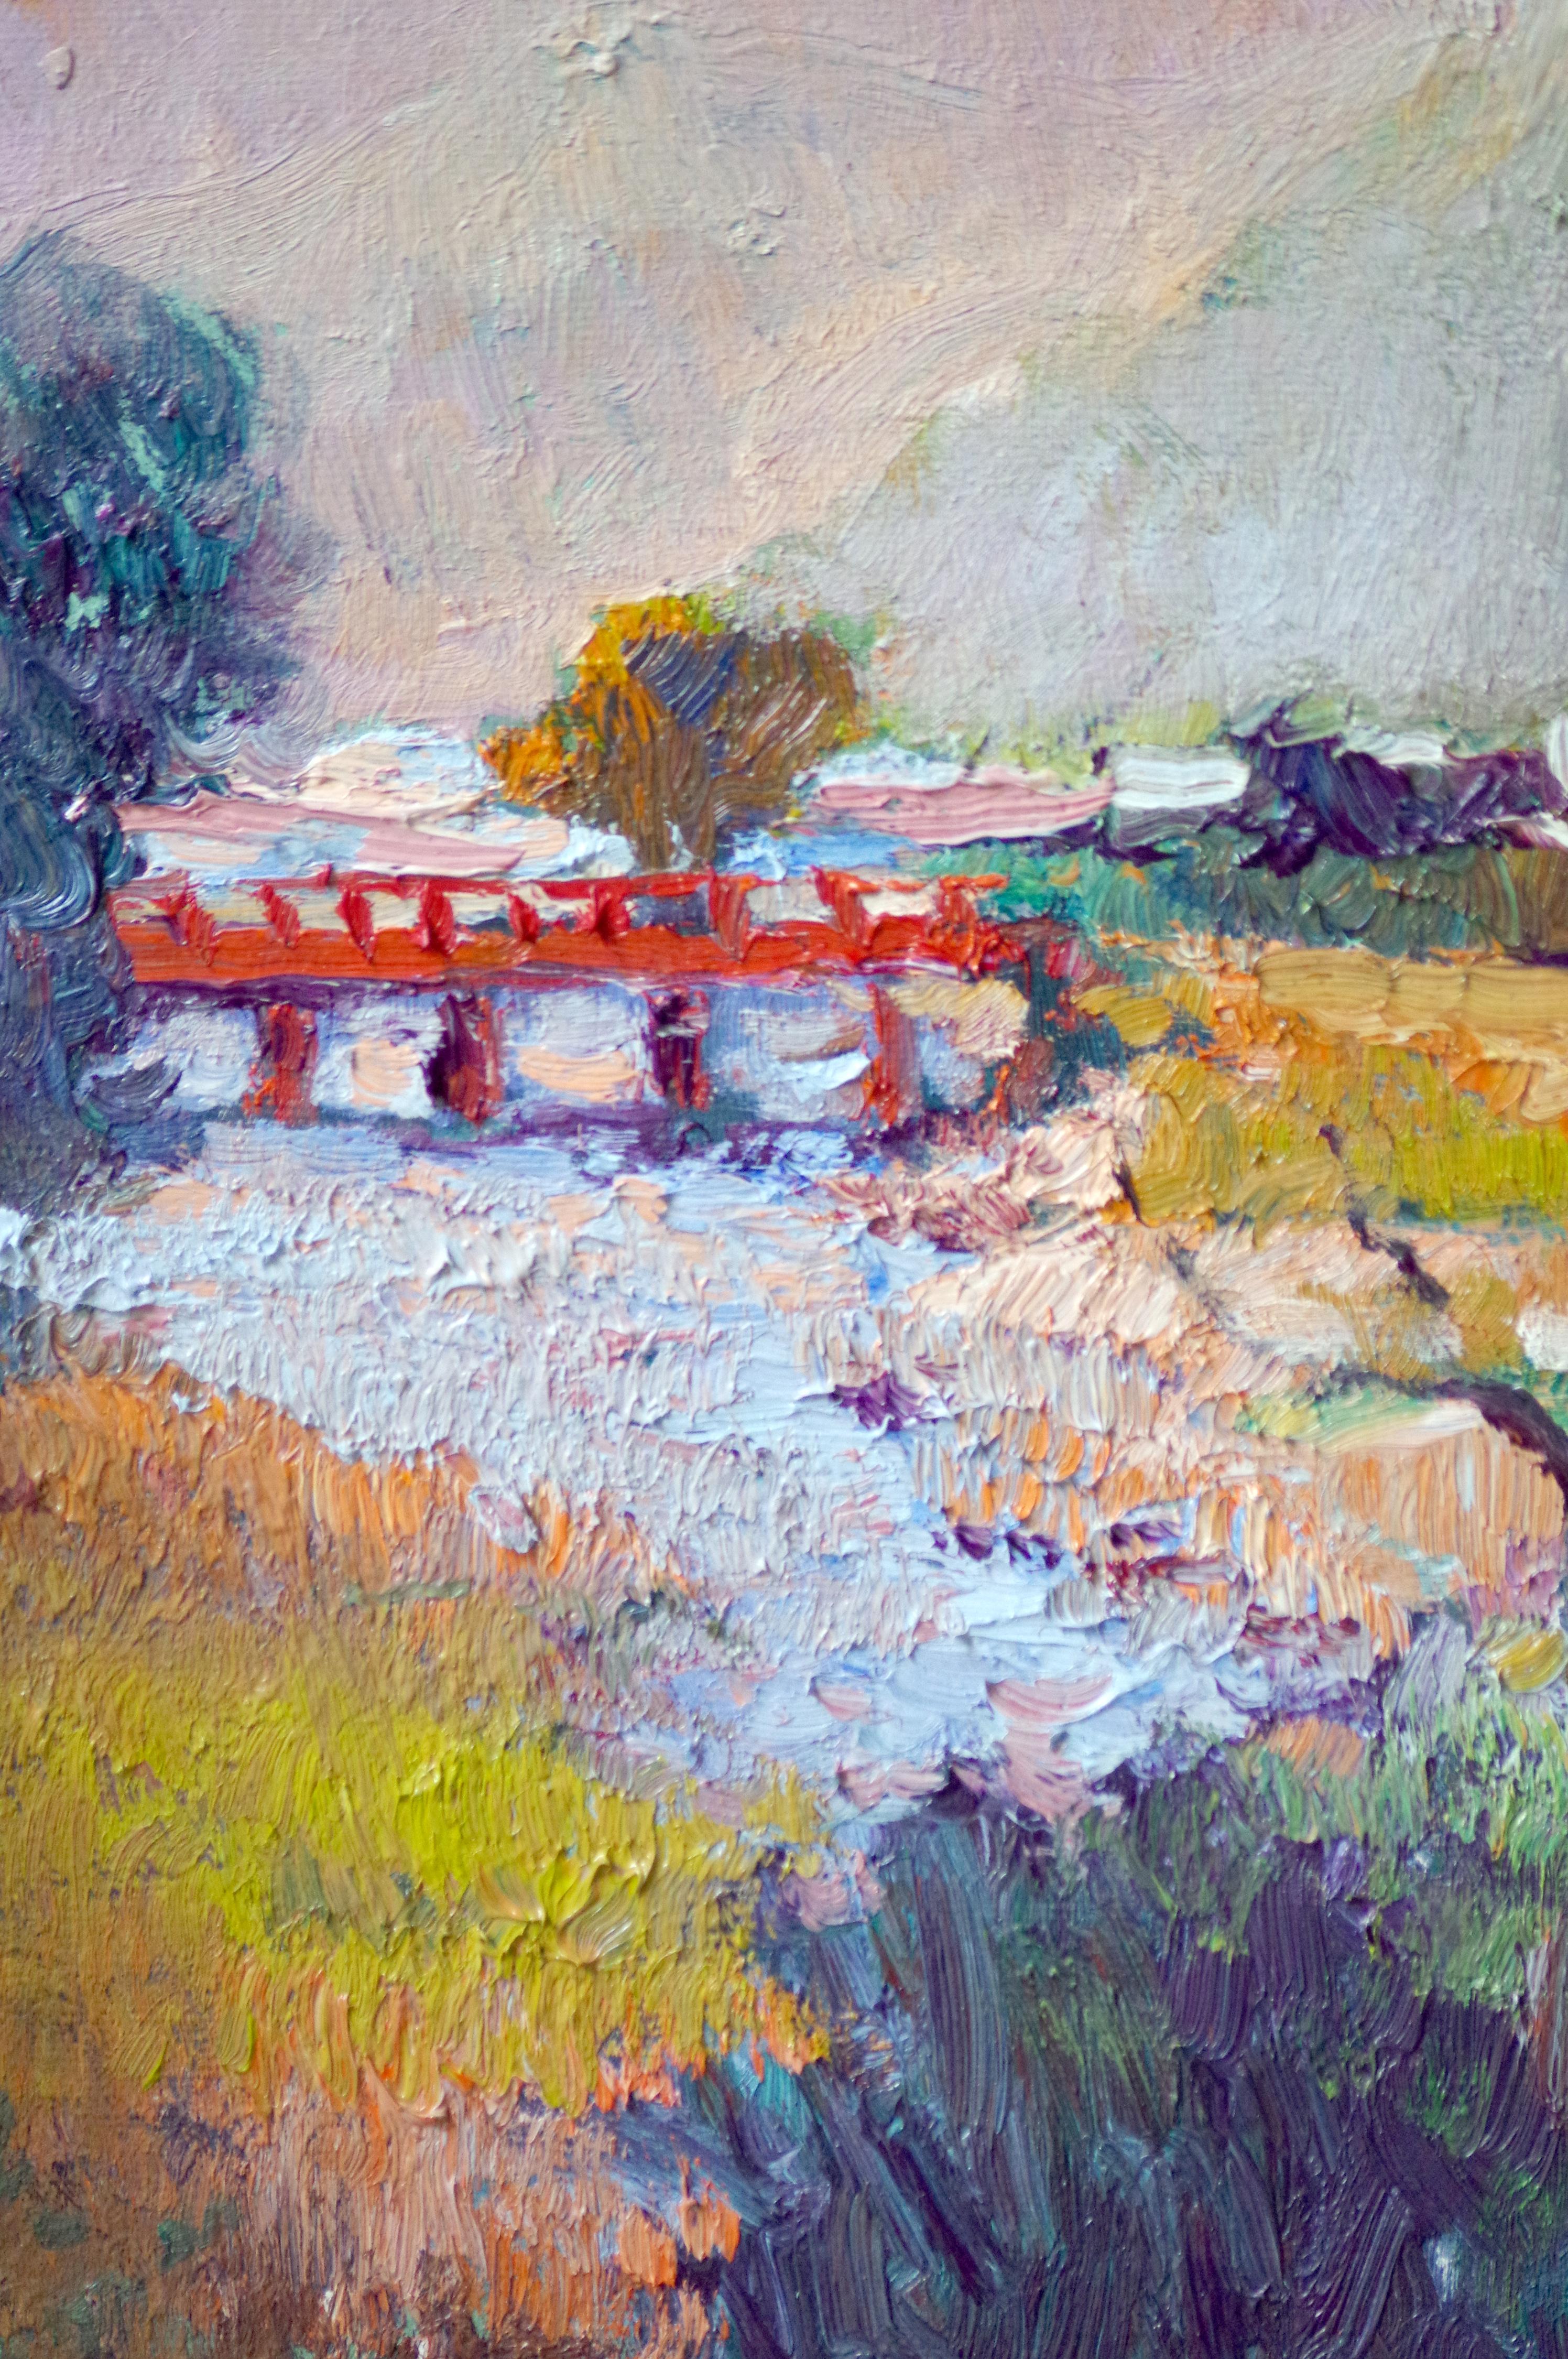 Evening Landscape with Red Bridge, Oil Painting - Gray Landscape Painting by Suren Nersisyan